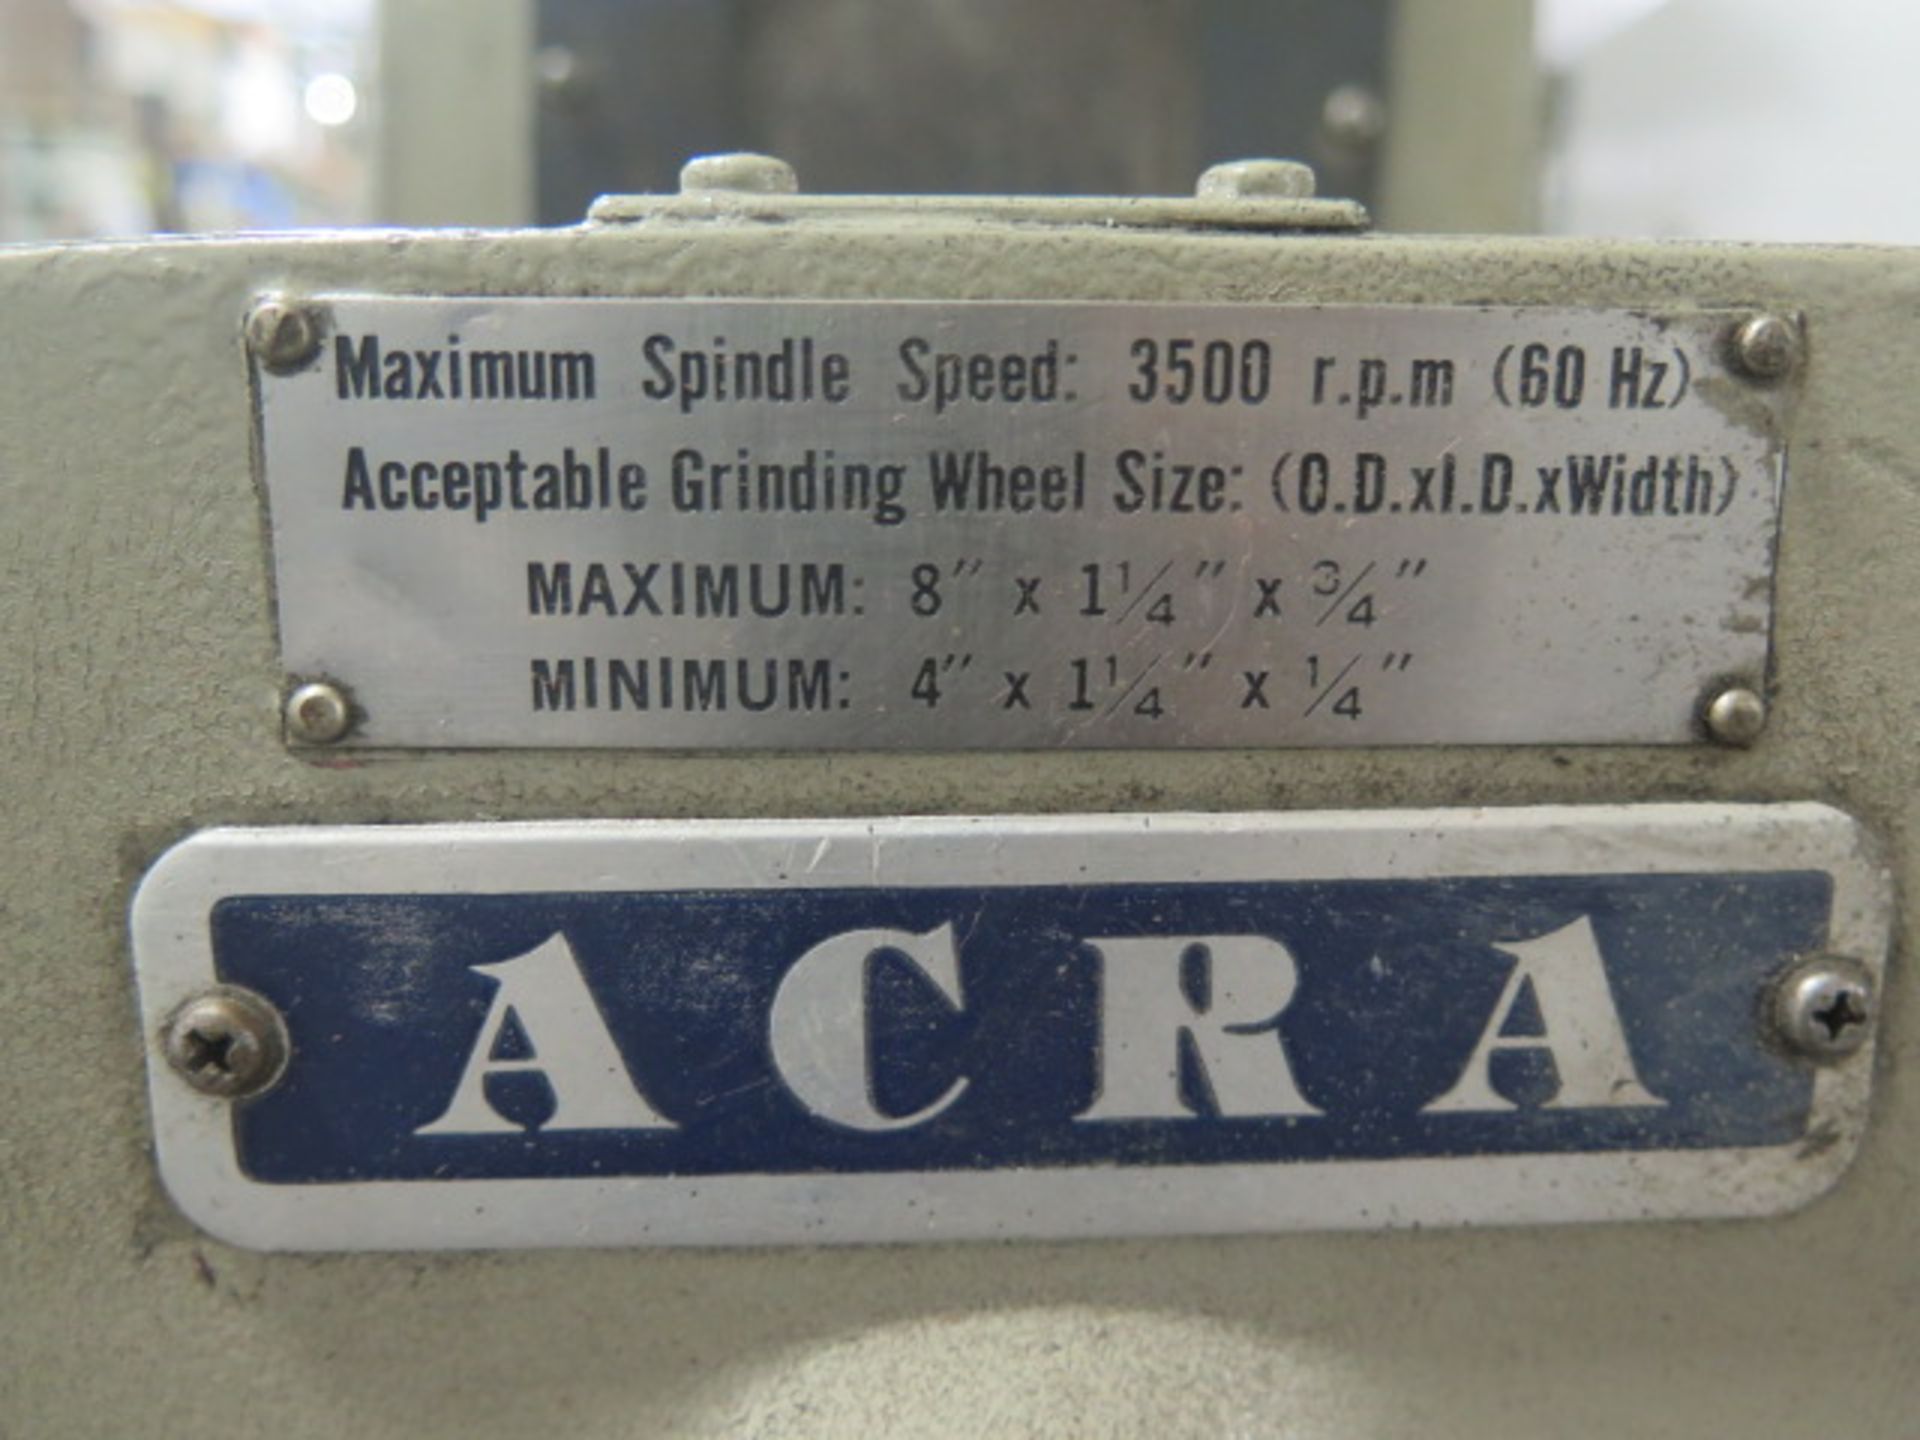 Acra Kong Kuang mdl. RS-612 6” x 12” Surface Grinder s/n 612012 w/ Magnetic Chuck - Image 6 of 7